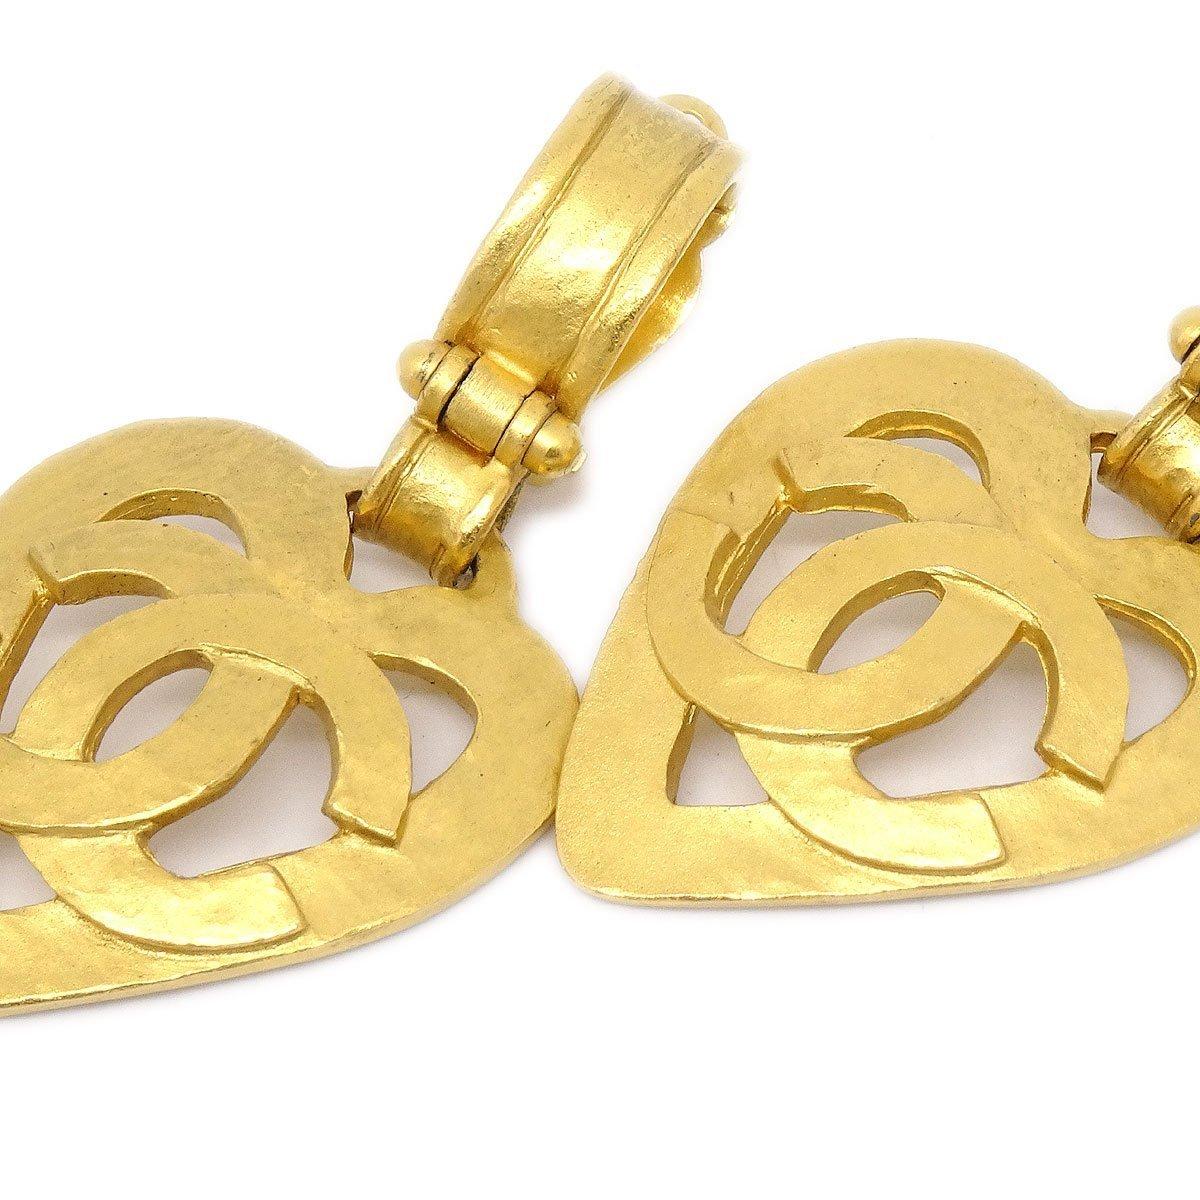 Pre-Owned Vintage Condition
From 1995 Collection
Metal
24K Gold Tone
Clip On
Width 1.25